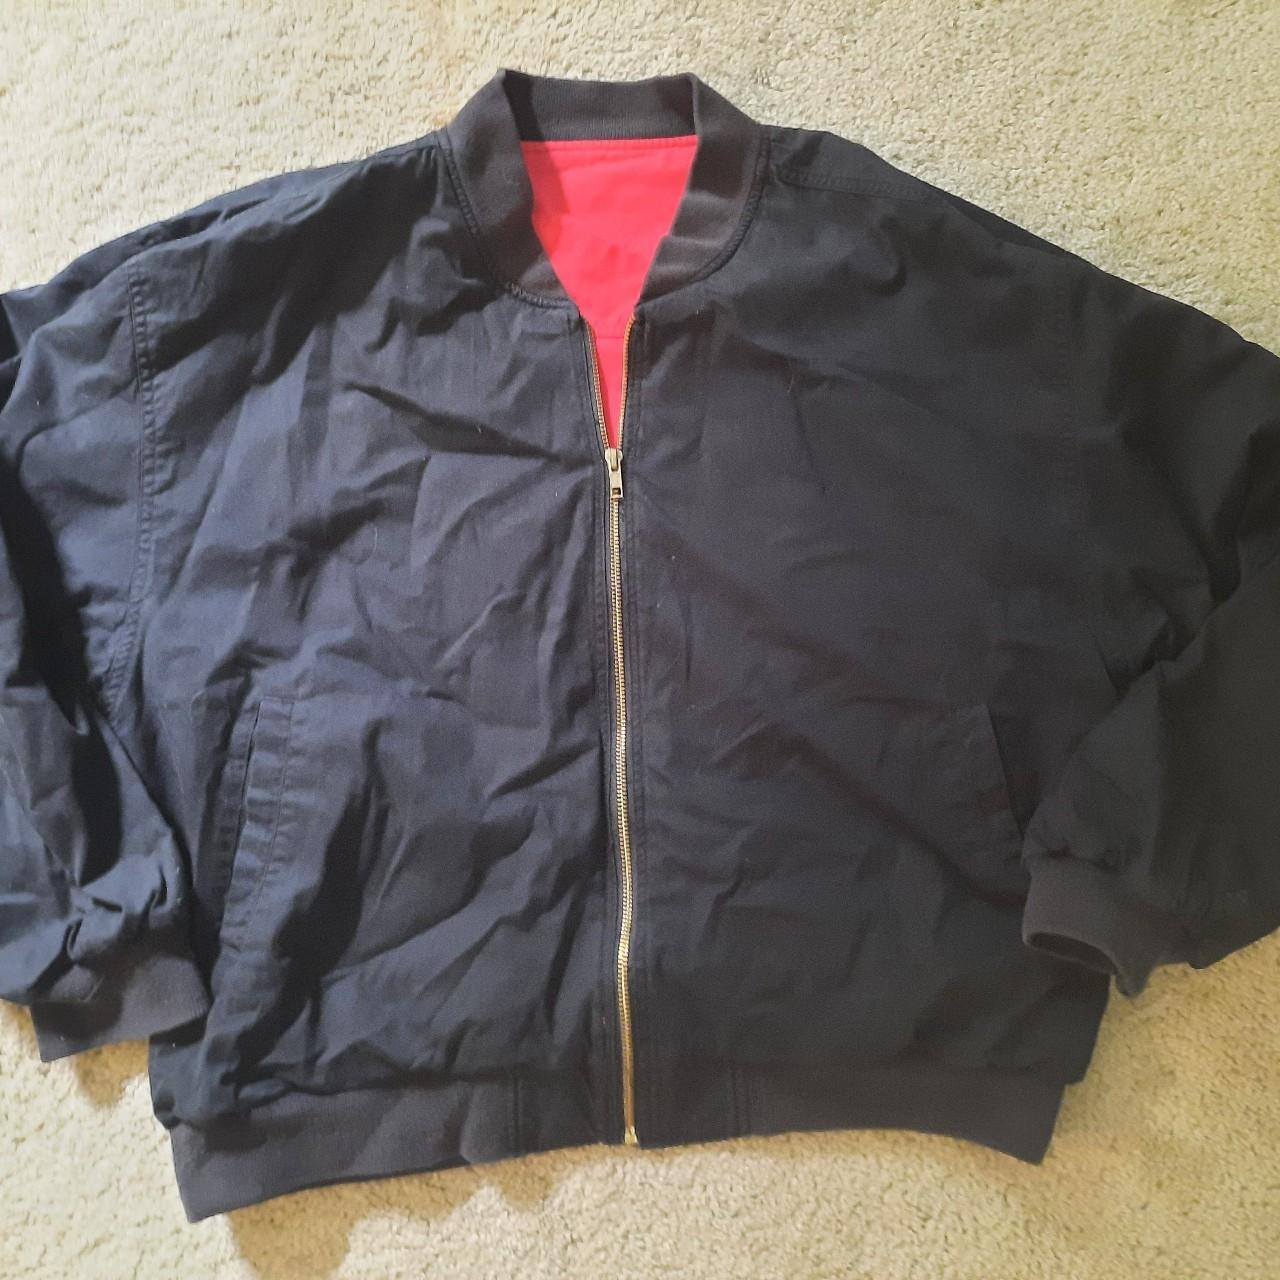 This vintage Marlboro jacket is a must-have for any... - Depop